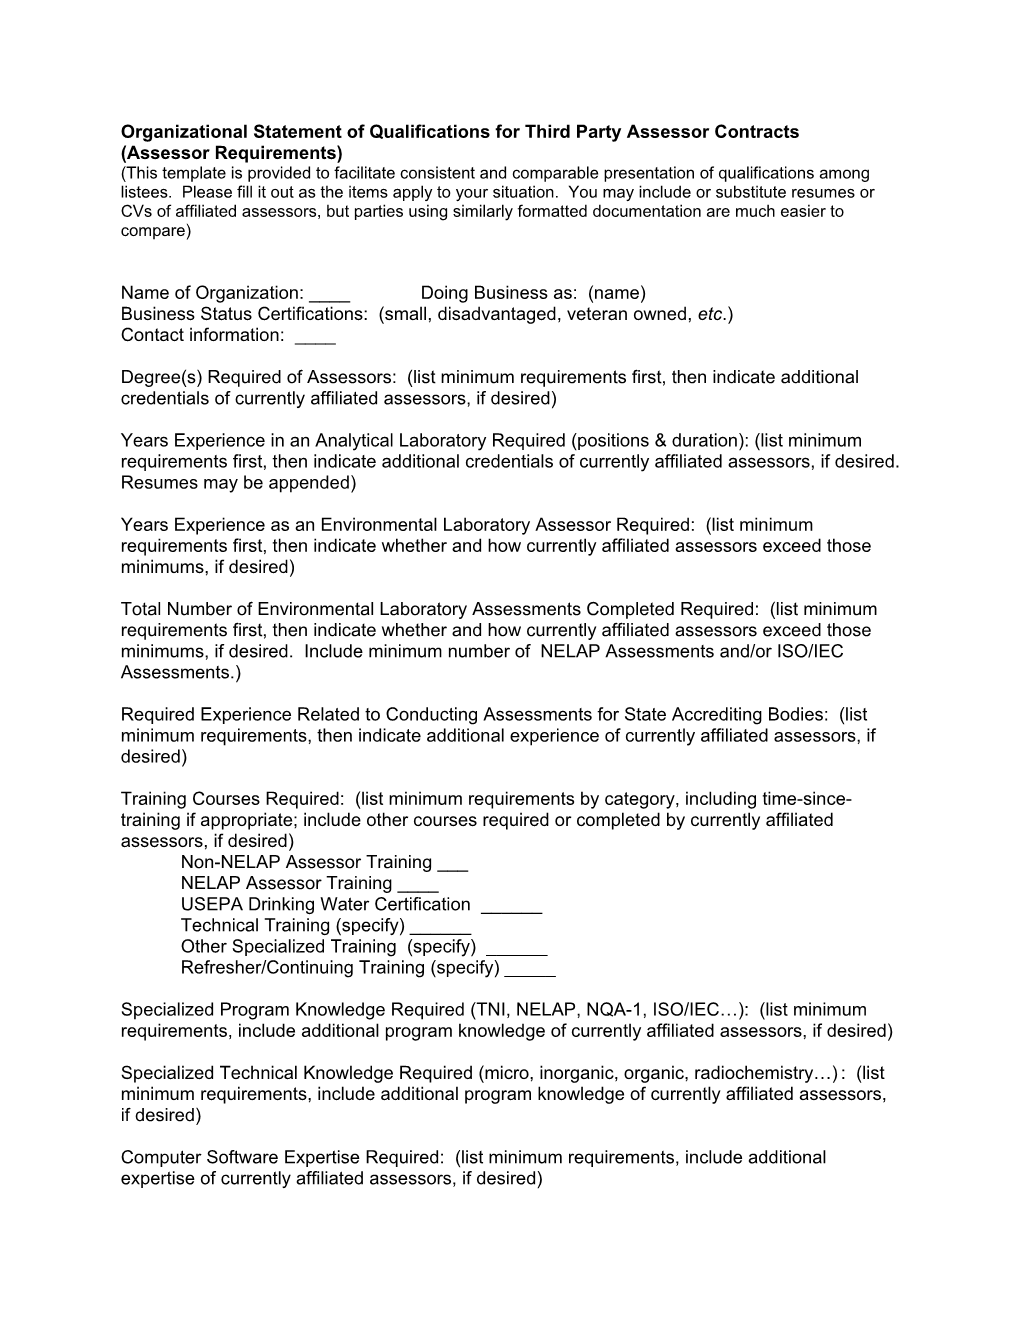 Organizational Statement of Qualifications for Third Party Assessor Contracts